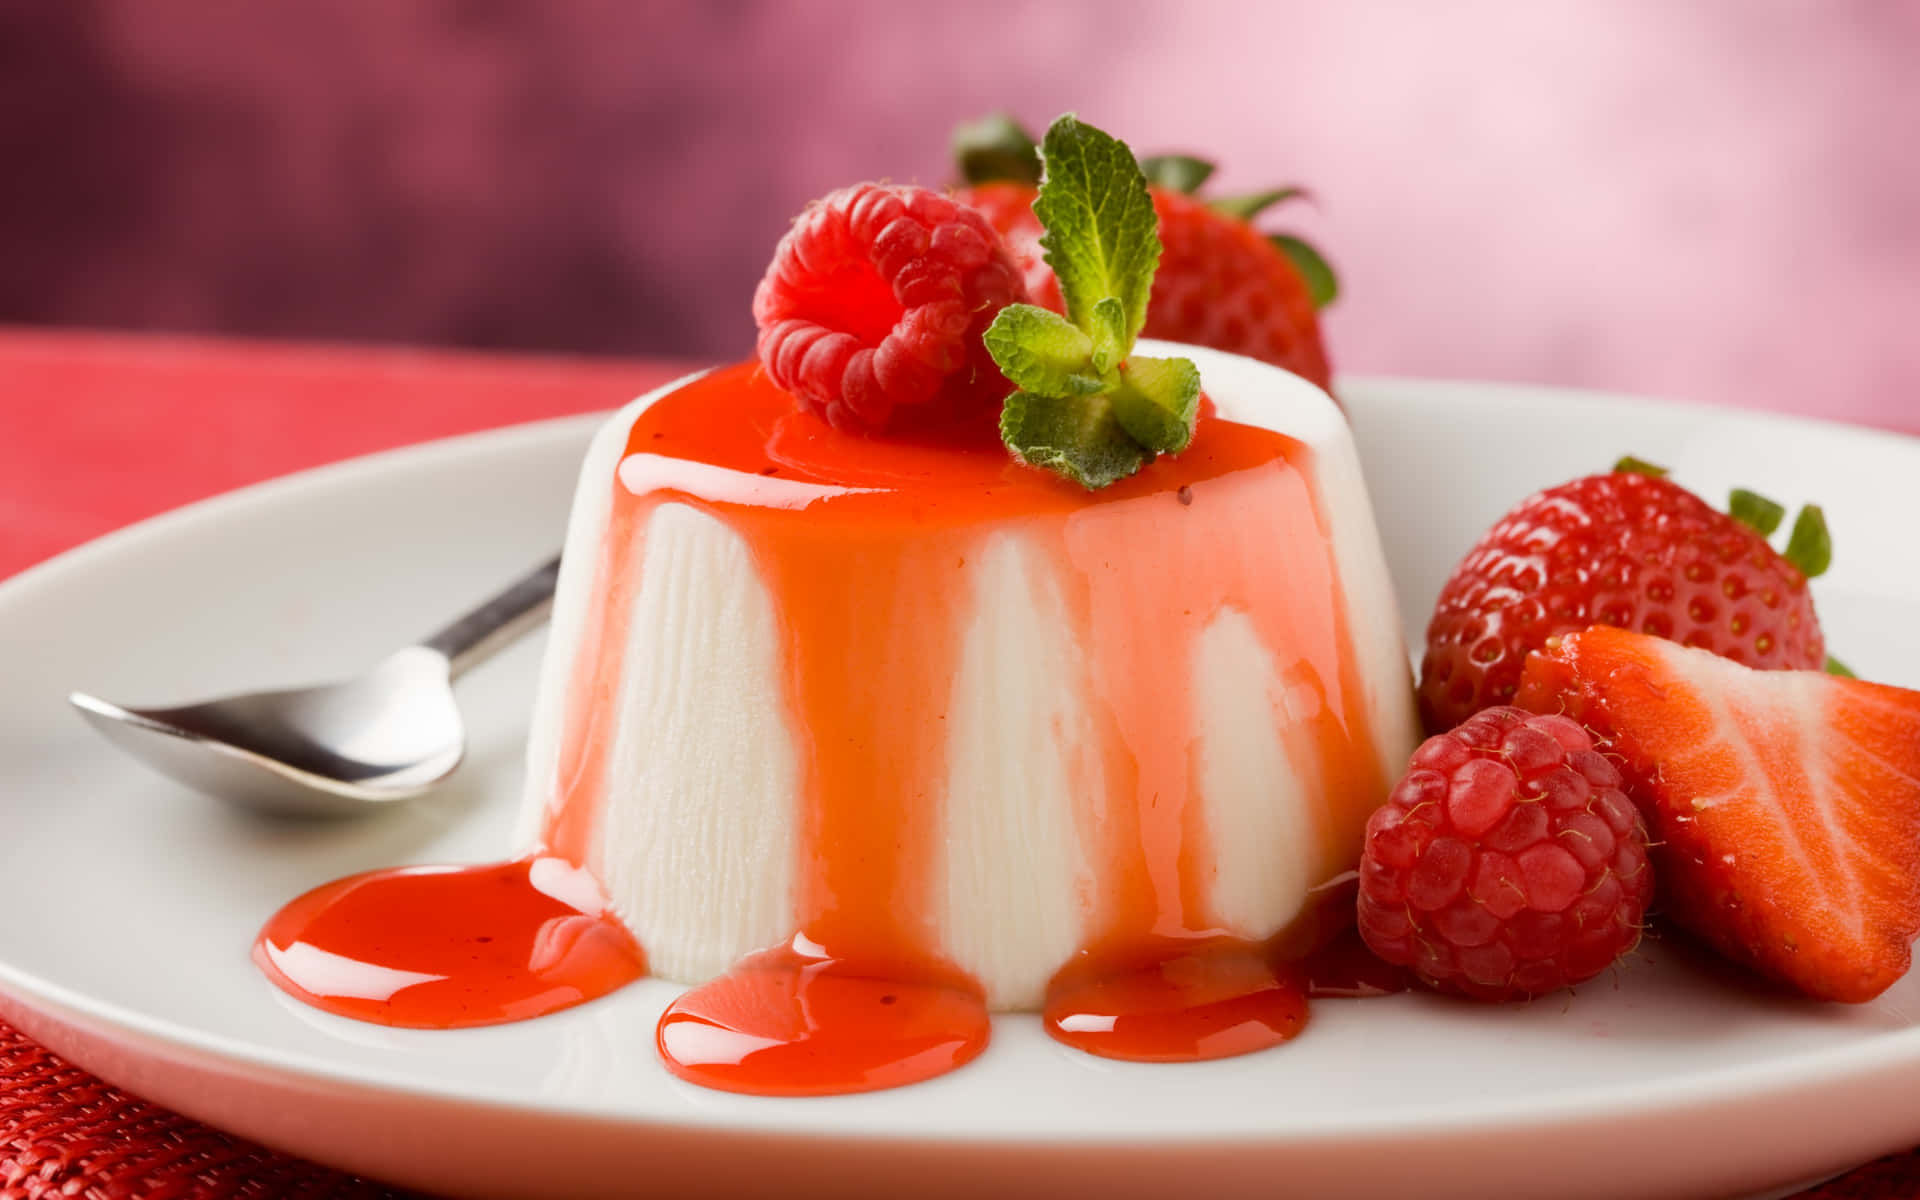 A Plate With A Dessert With Strawberries And Cream